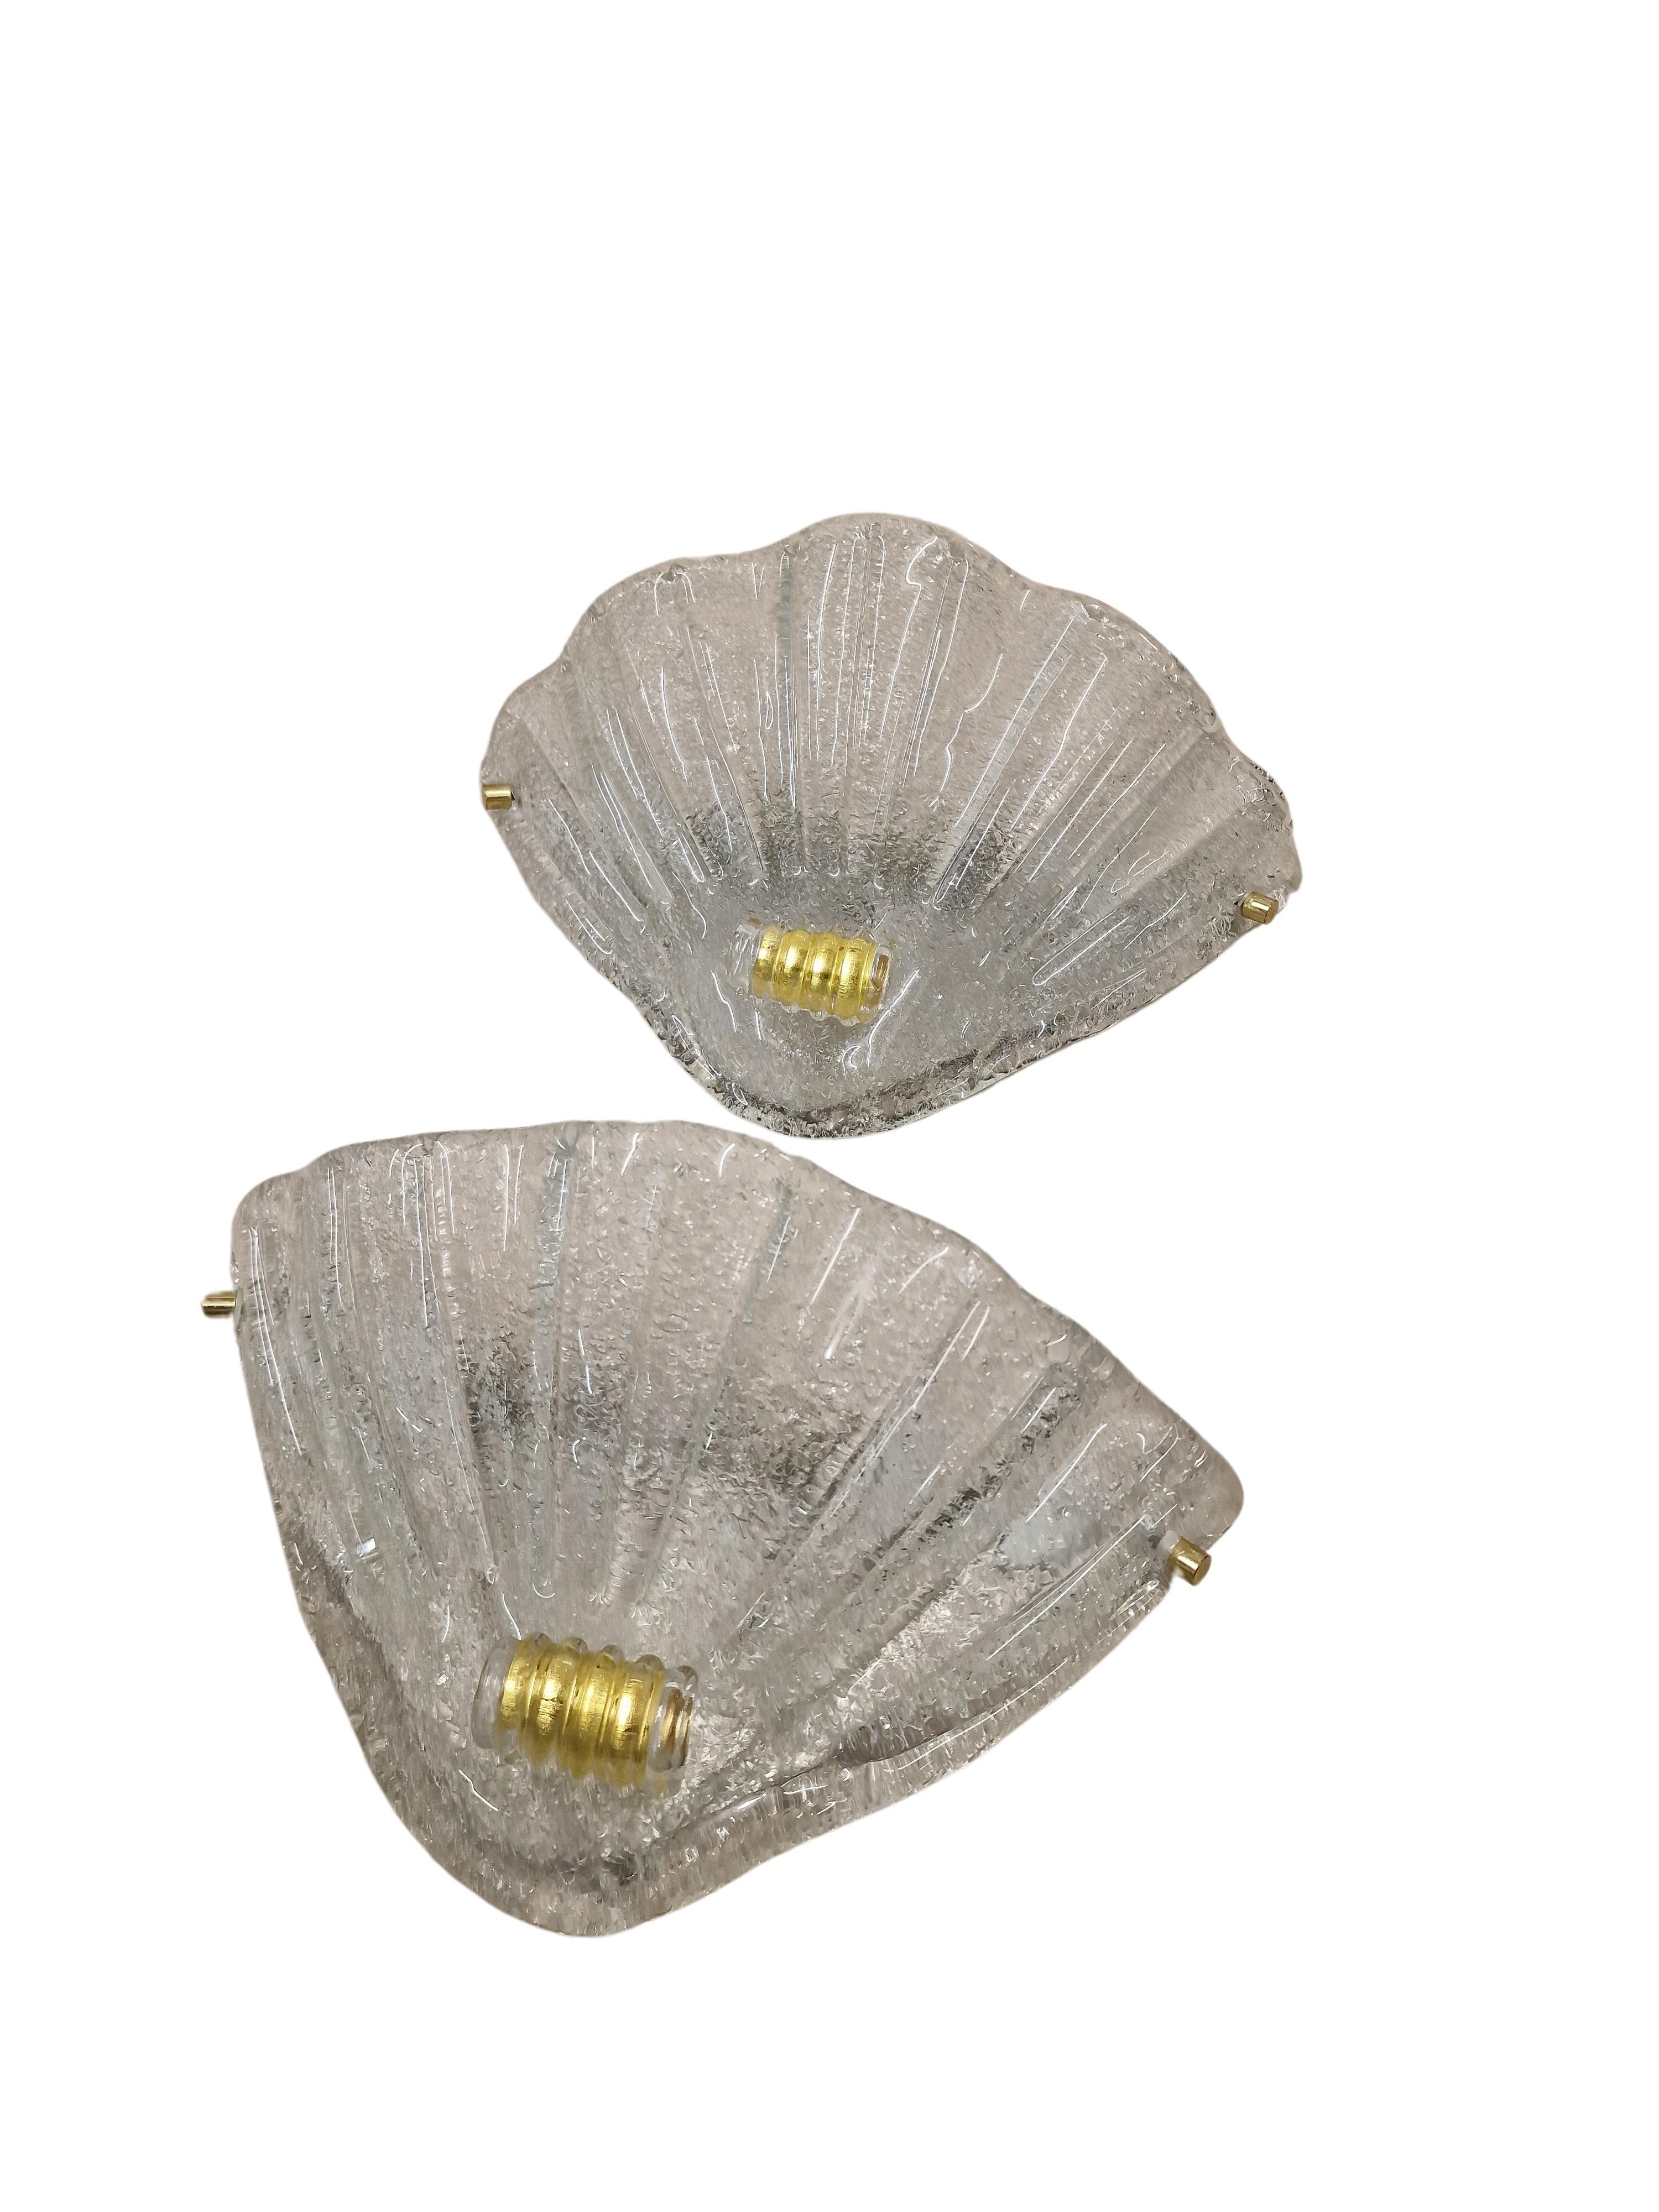 Charming wall lamps, appliques, made of glass - transparent and gold, made in the 1980s, handcrafted by a famous glass manufacturer from Murano, Italy.

The two lamps are in fantastic condition. The classic shape shows a sea shell that unfolds at